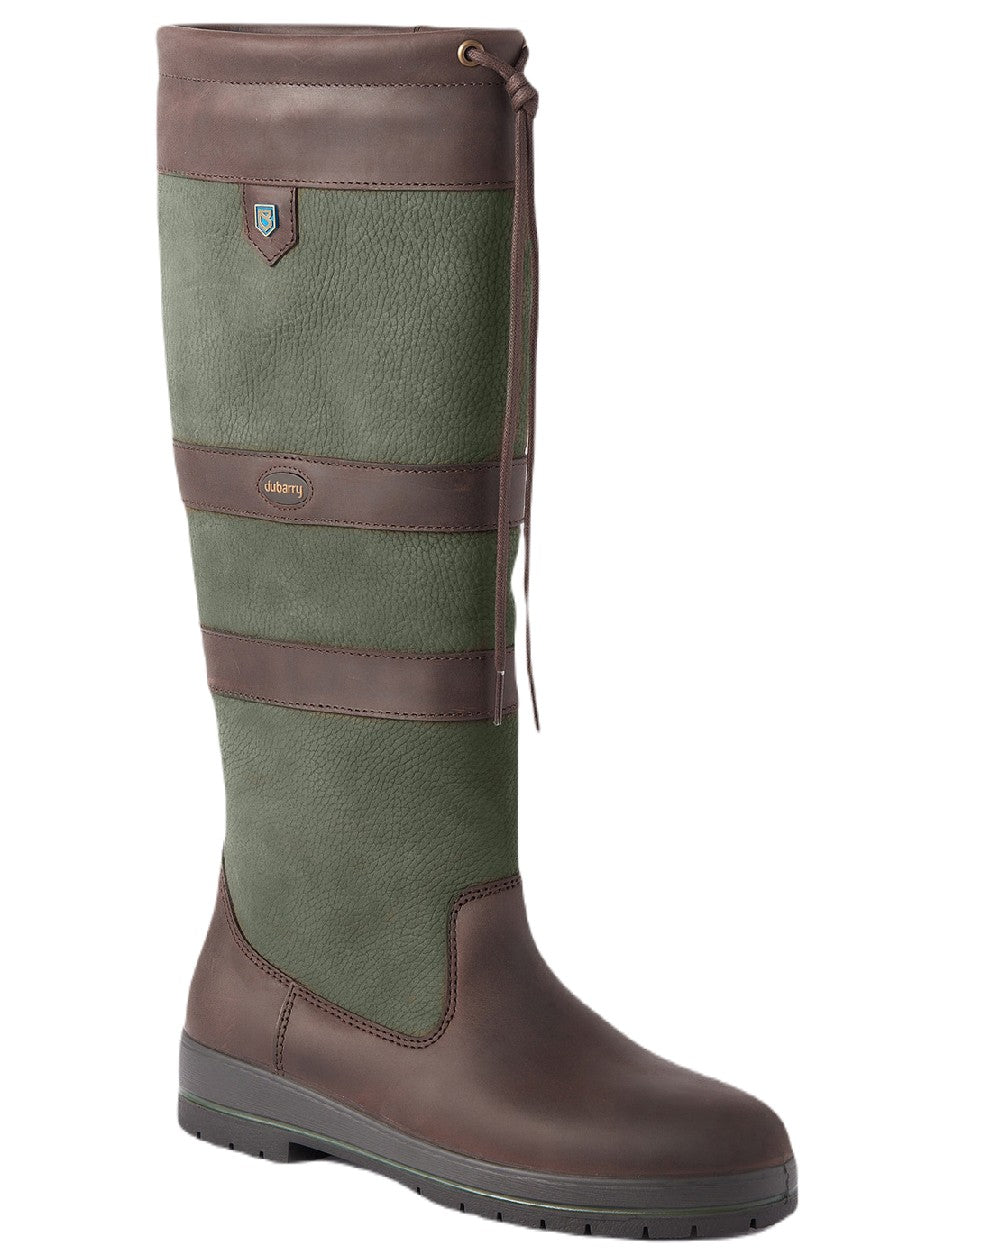 Dubarry Galway Country Boots in Ivy Brown 